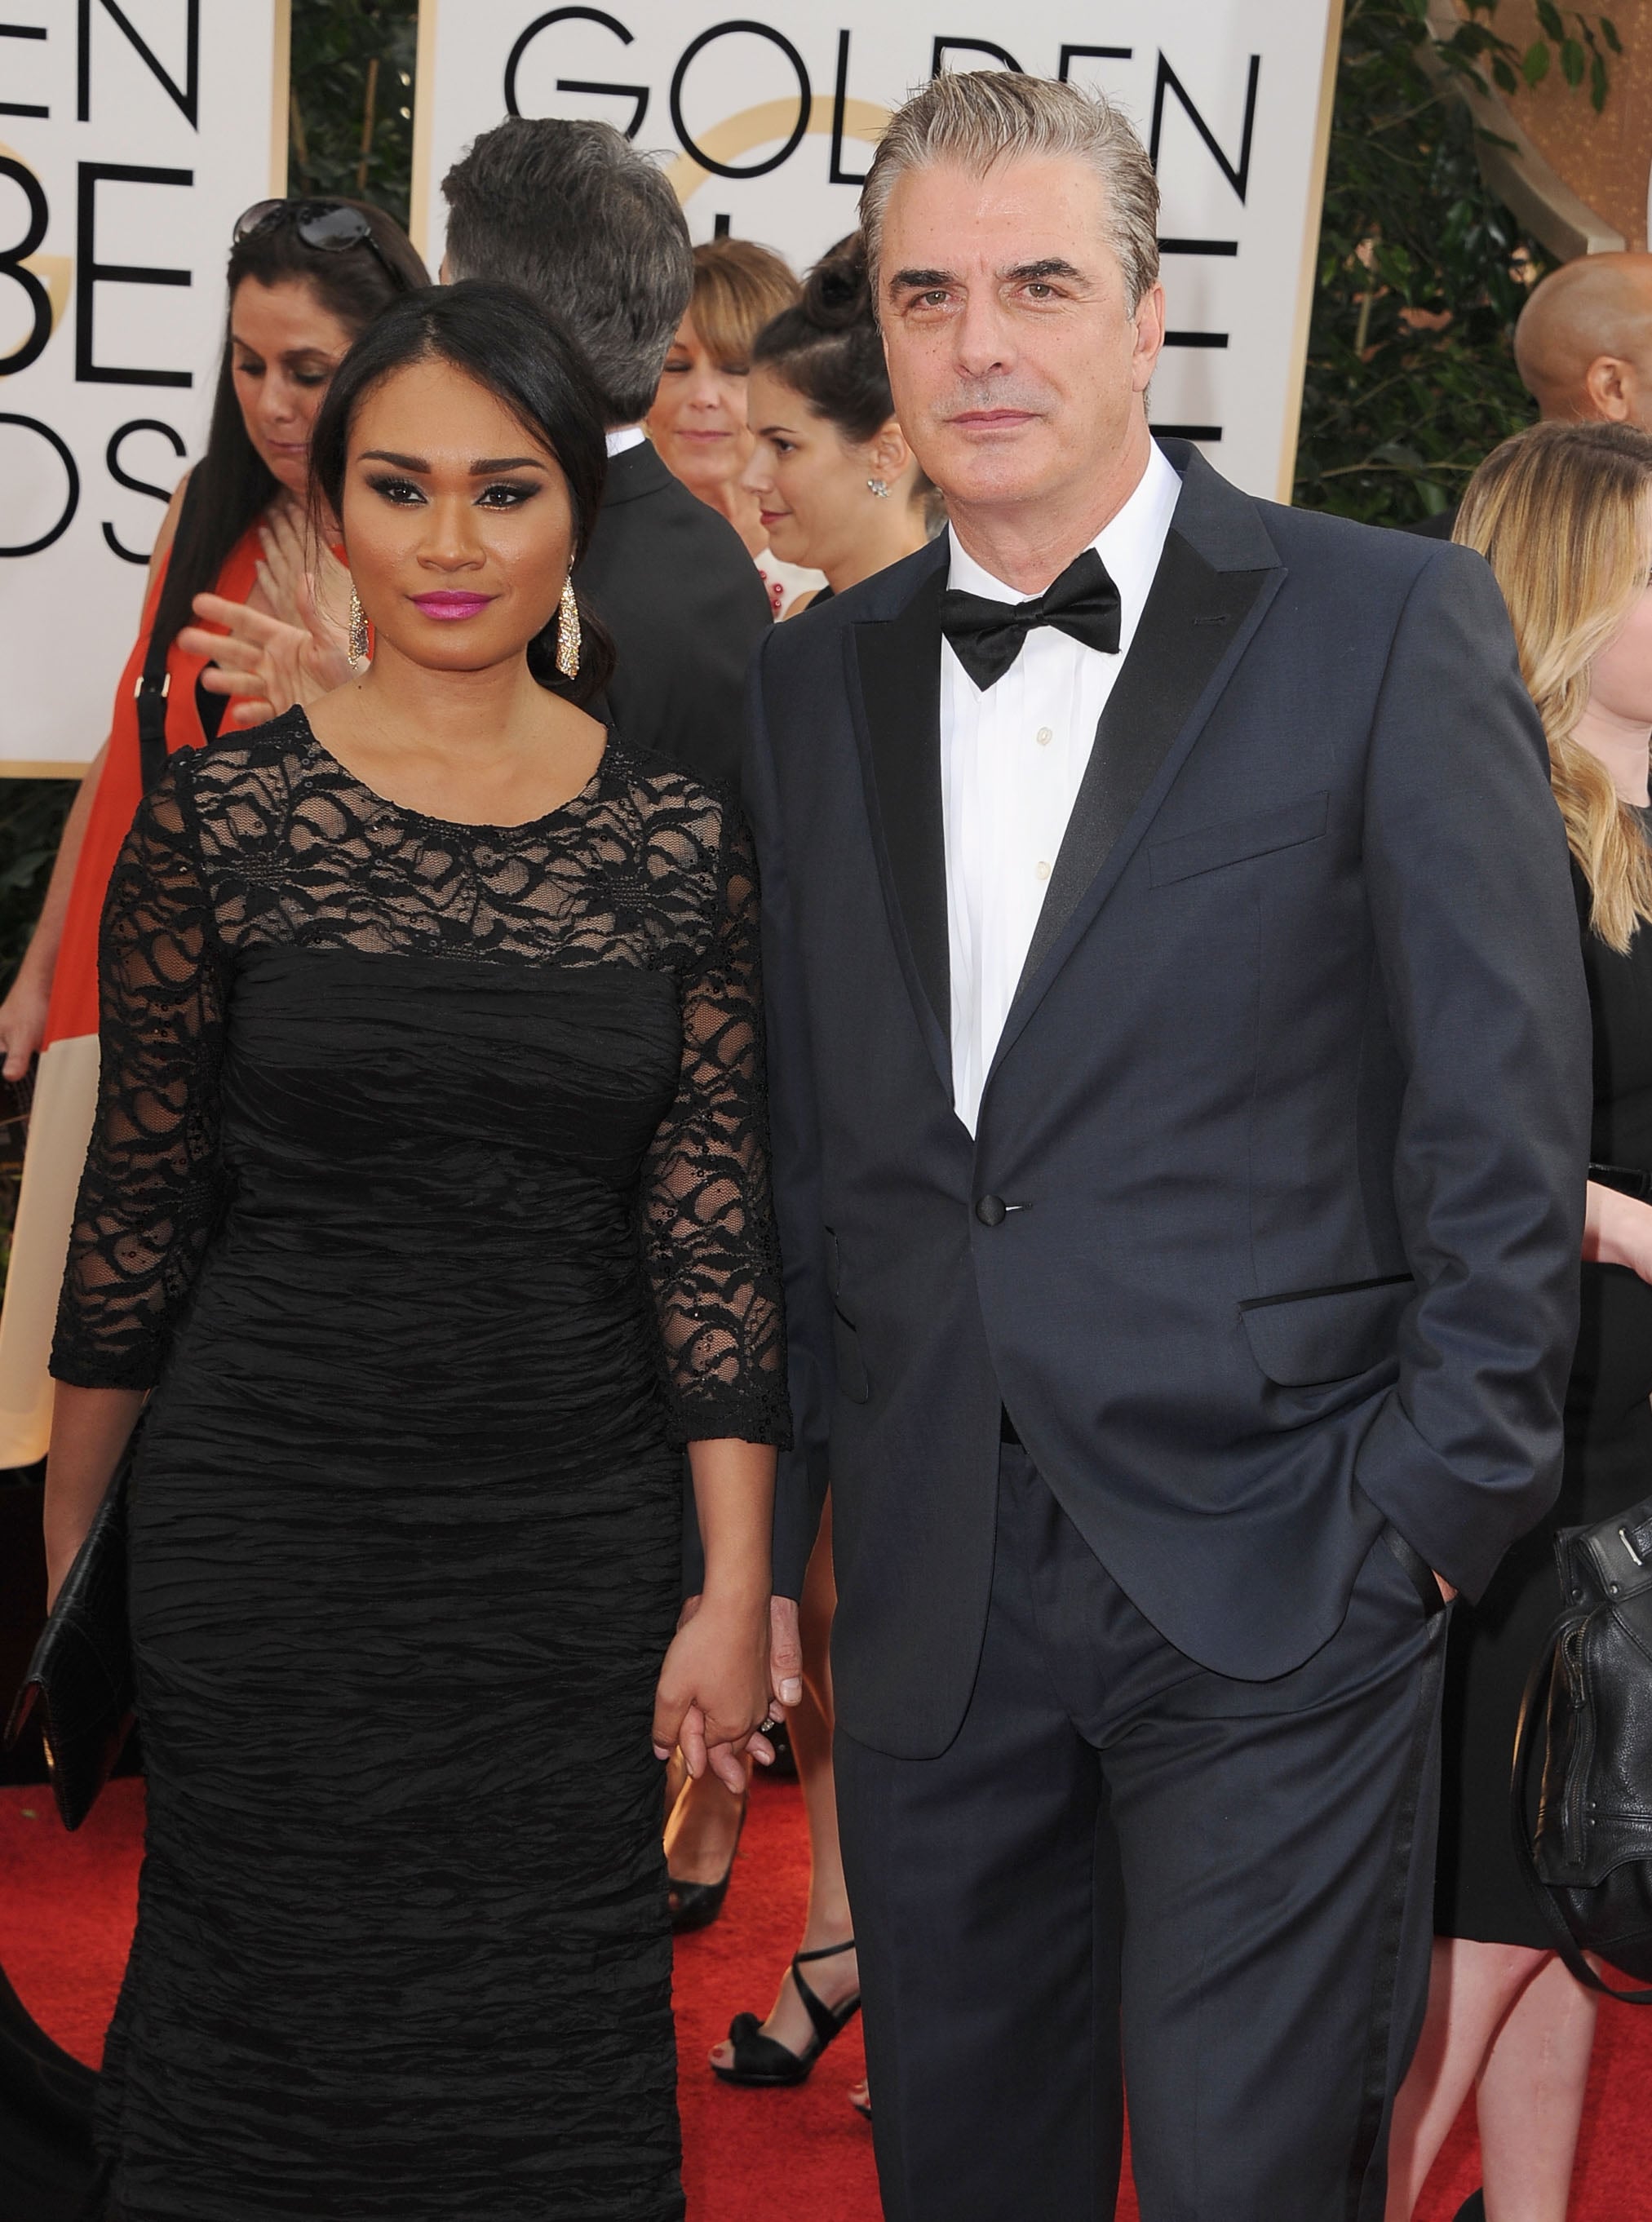 Chris Noth And Tara Wilson Attended The Golden Globes It S Date Night At The Golden Globes Popsugar Celebrity Photo 25